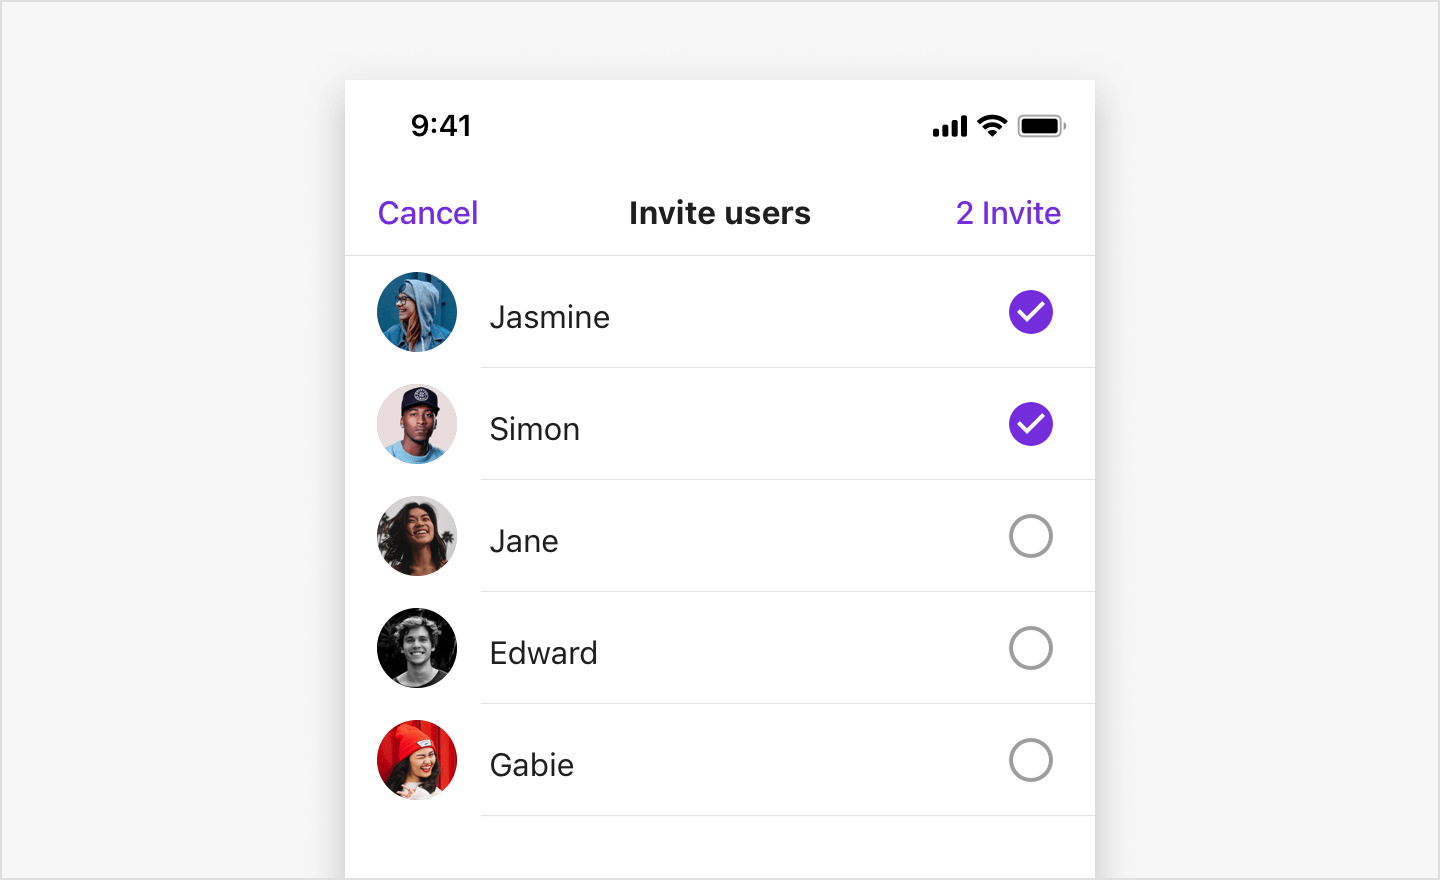 Image|SBUInviteUserViewController, which let you list users to invite to a group channel in view.